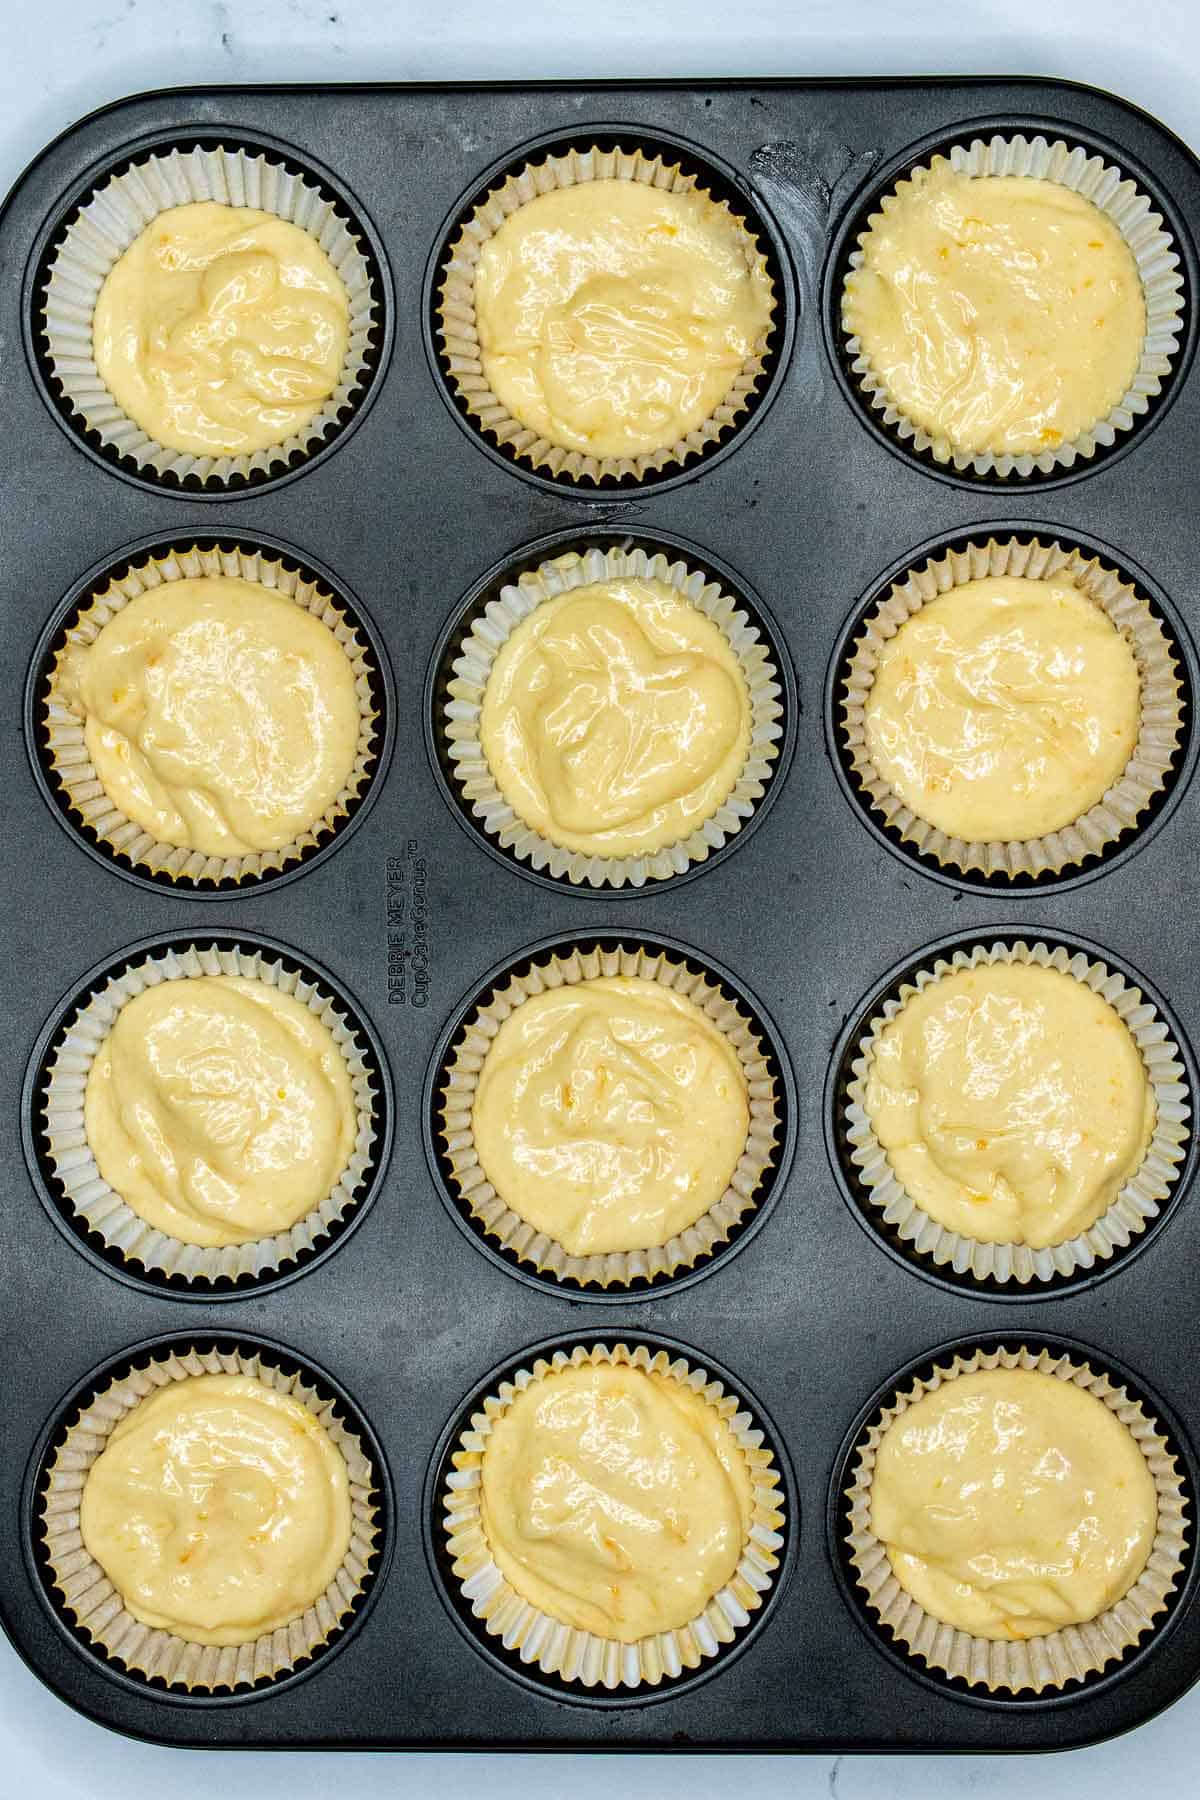 Meyer lemon cupcake batter added to lined muffin tin.